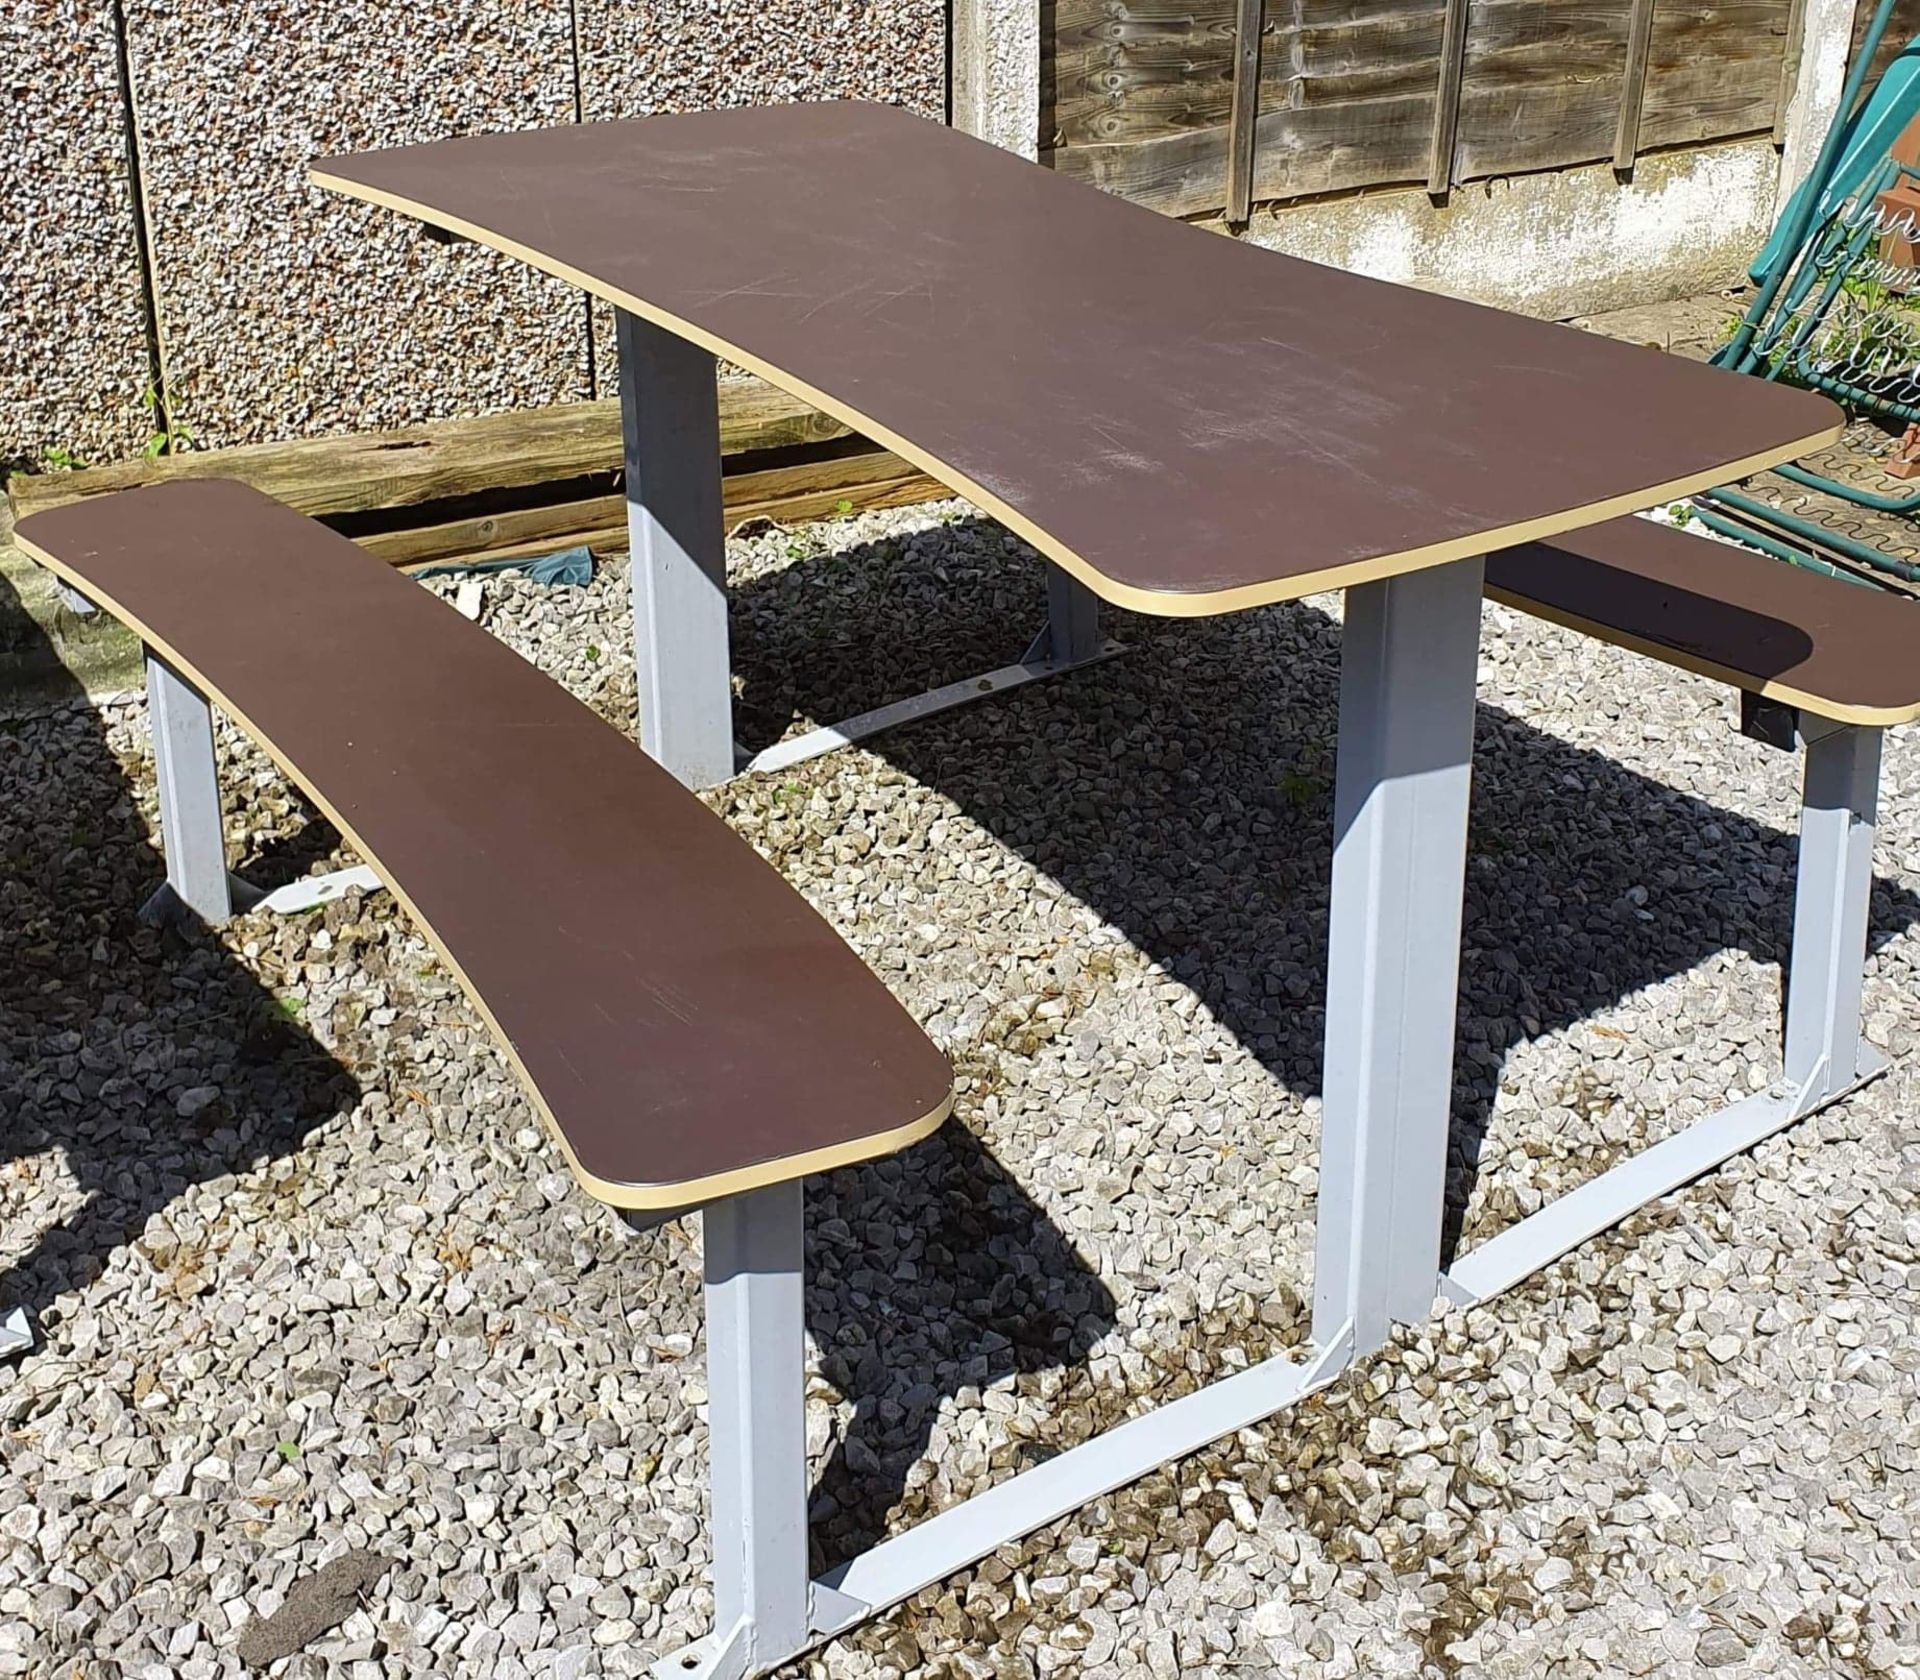 Commercial Outdoor bench seating x 5 - Image 2 of 2